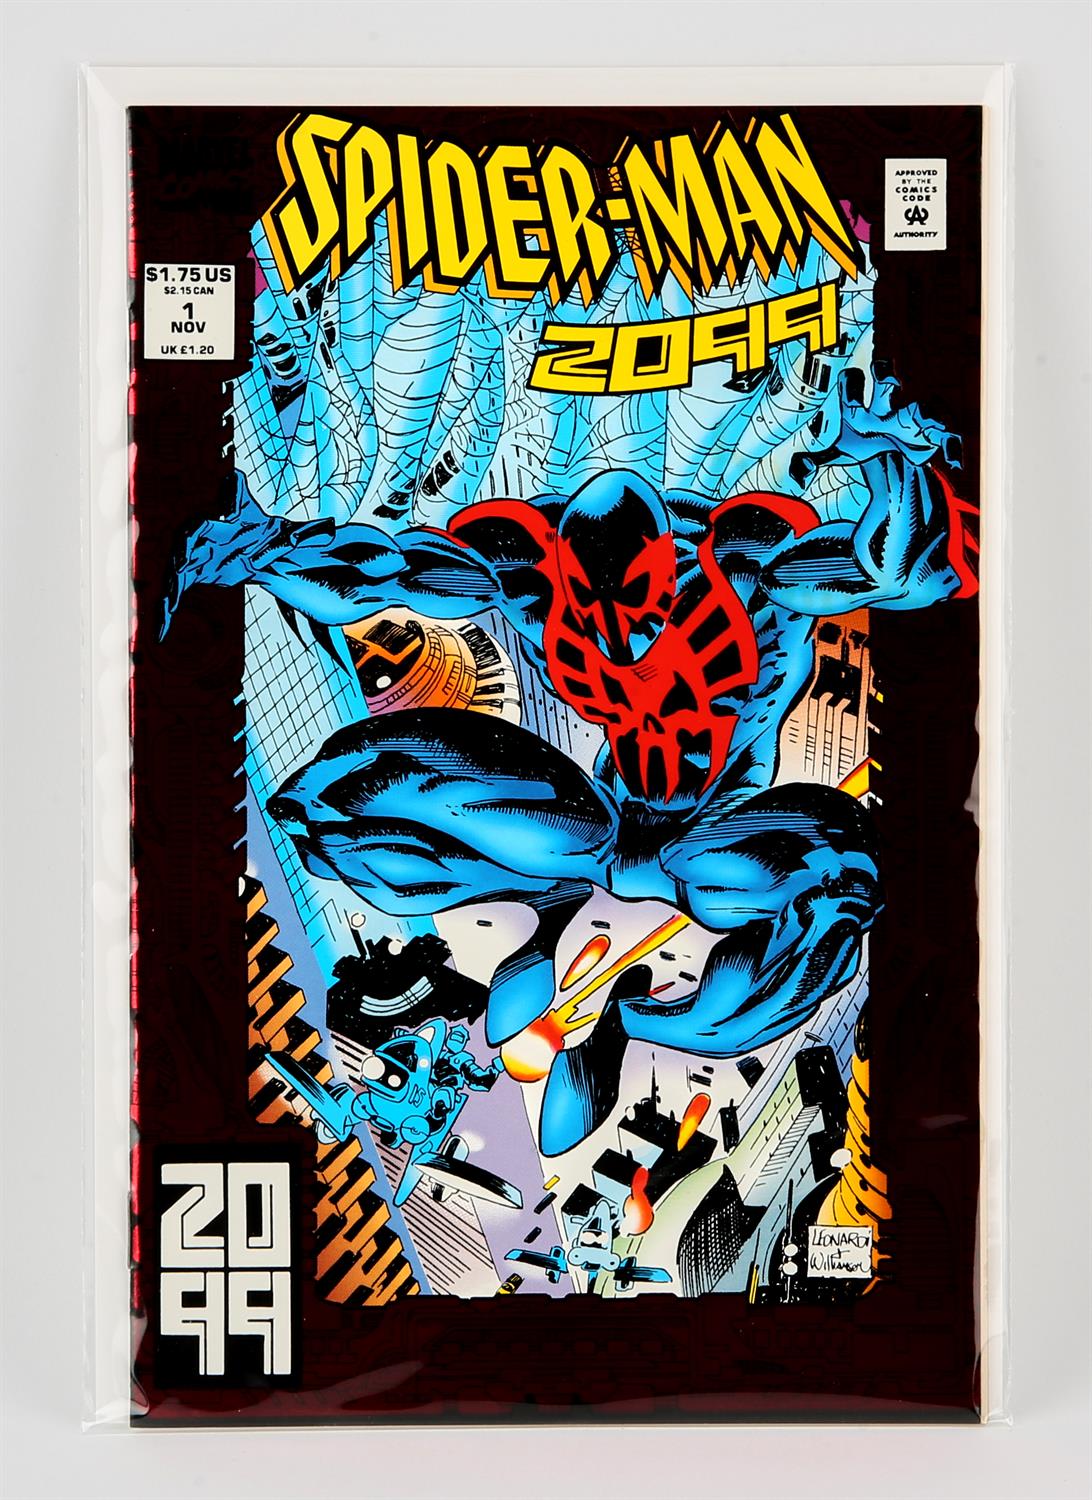 Marvel Comics: Spider-Man 2099 No. 1 featuring the 1st appearance of She-Hulk (1992).